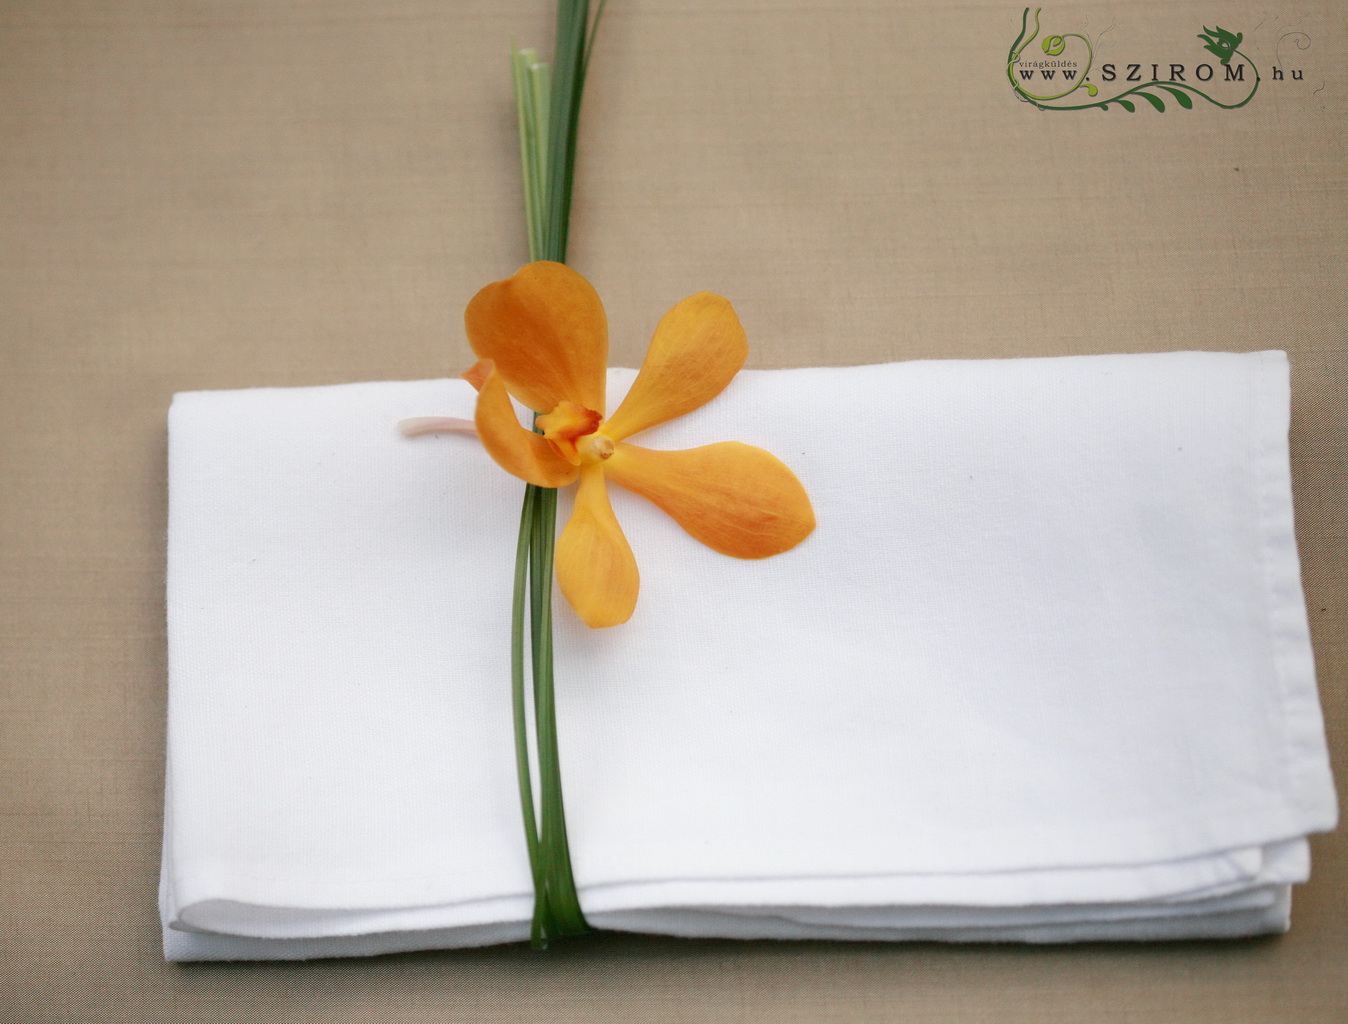 flower delivery Budapest - napkin decor with flowers, orange orchid, wedding